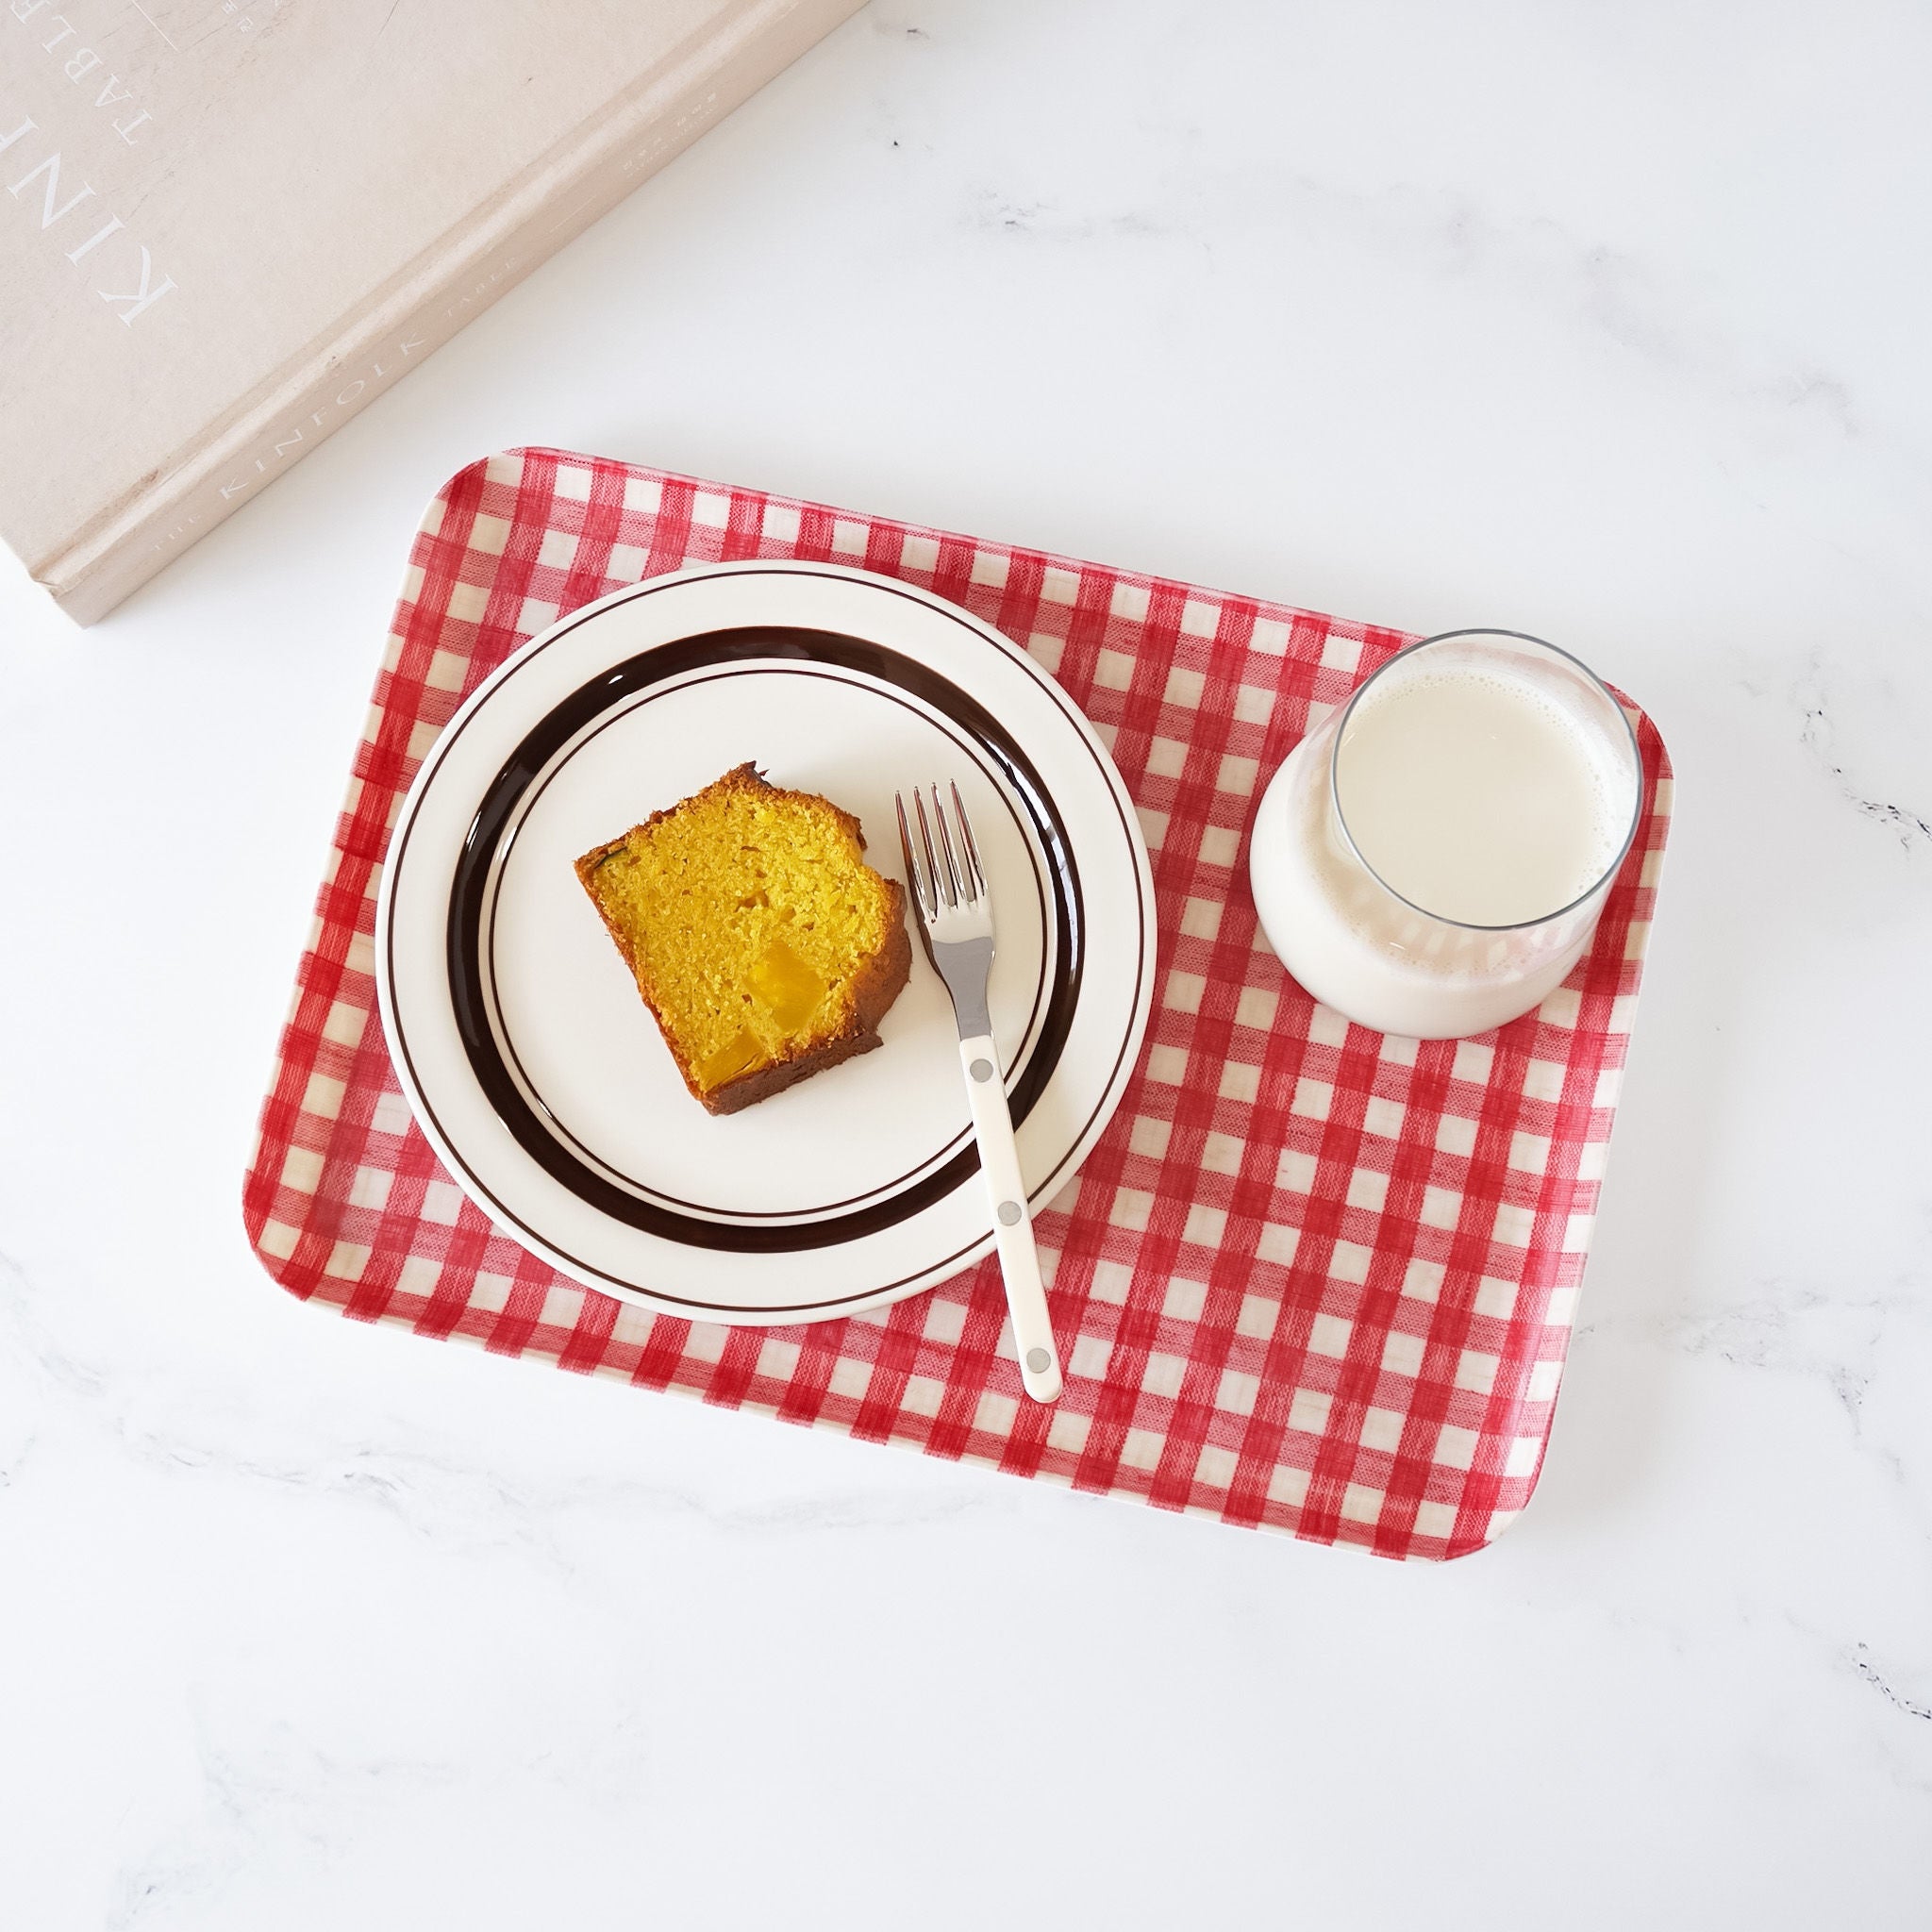 pound cake and milk on a red check serving tray